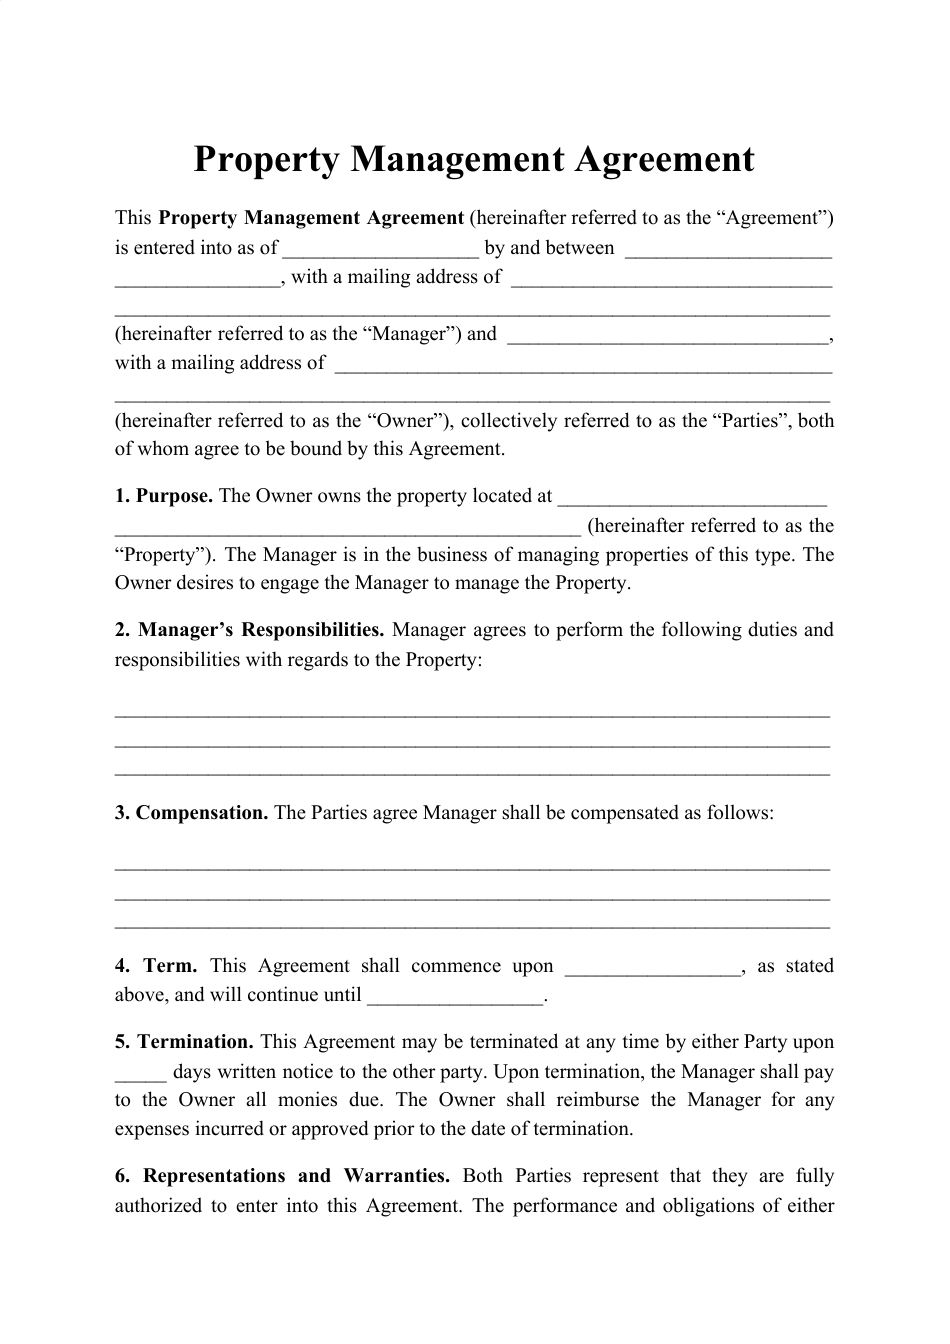 Property Management Agreement Template Fill Out Sign Online and